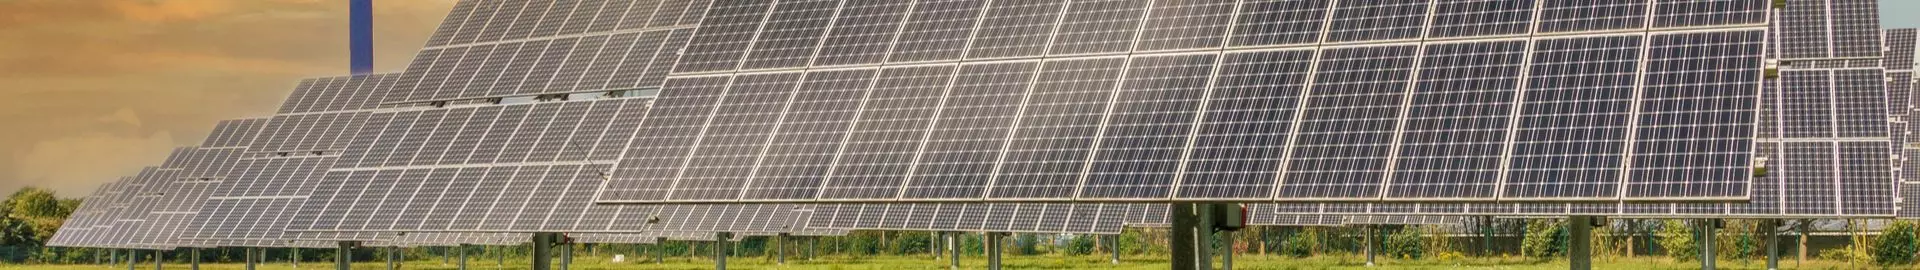 Solar PV Mounting Systems Market